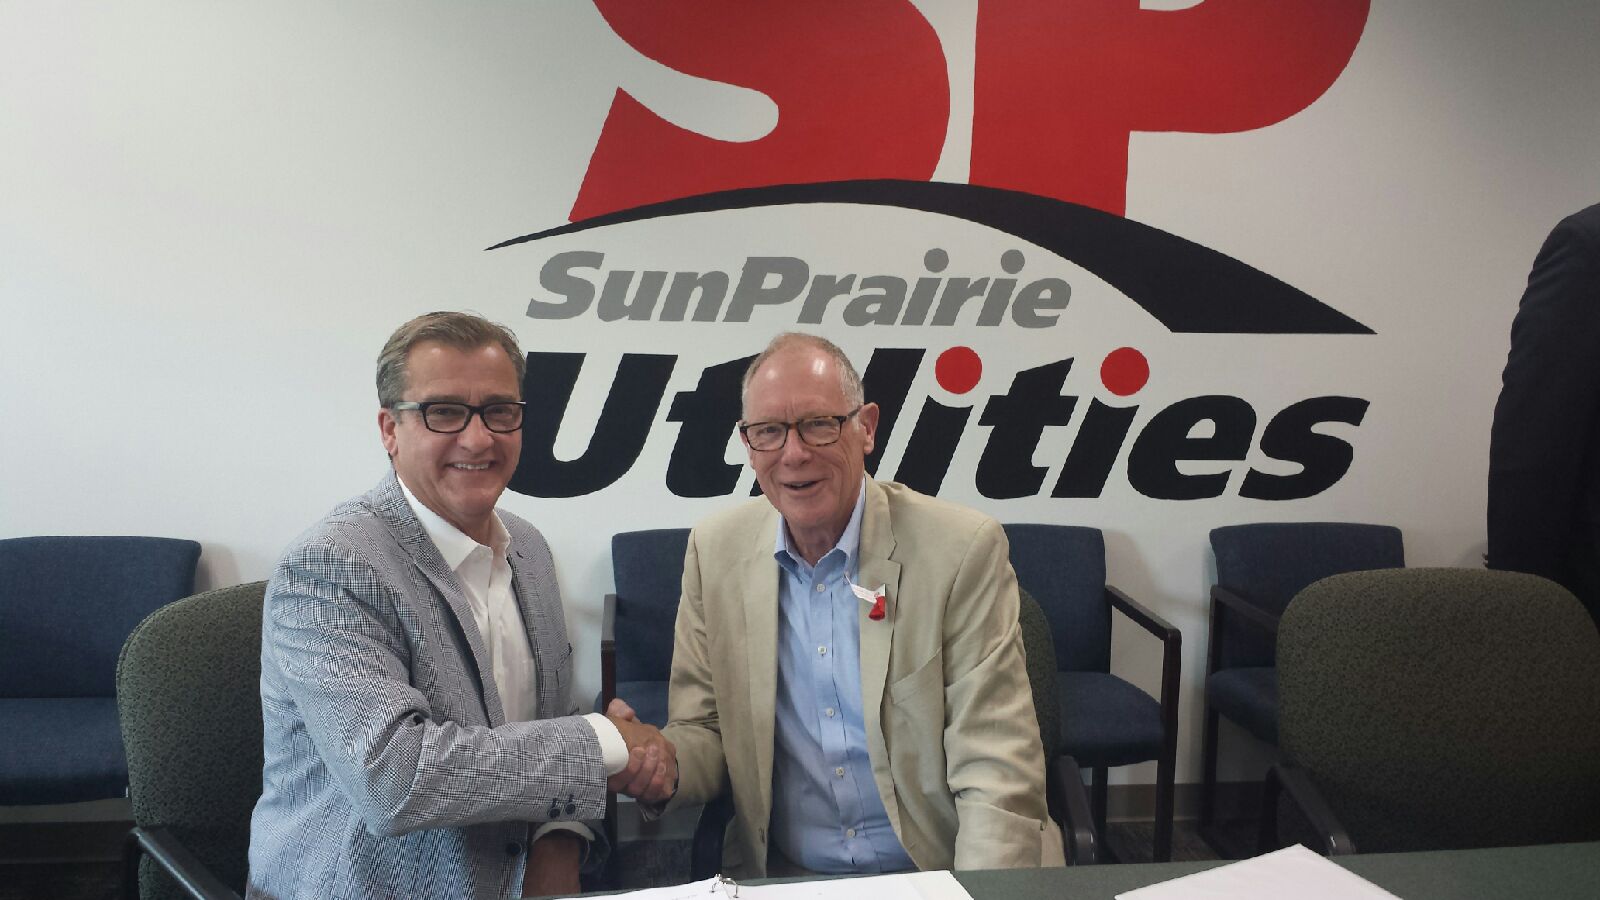 Jim Butman, COO at TDS and Paul Esser, Mayor of Sun Prairie